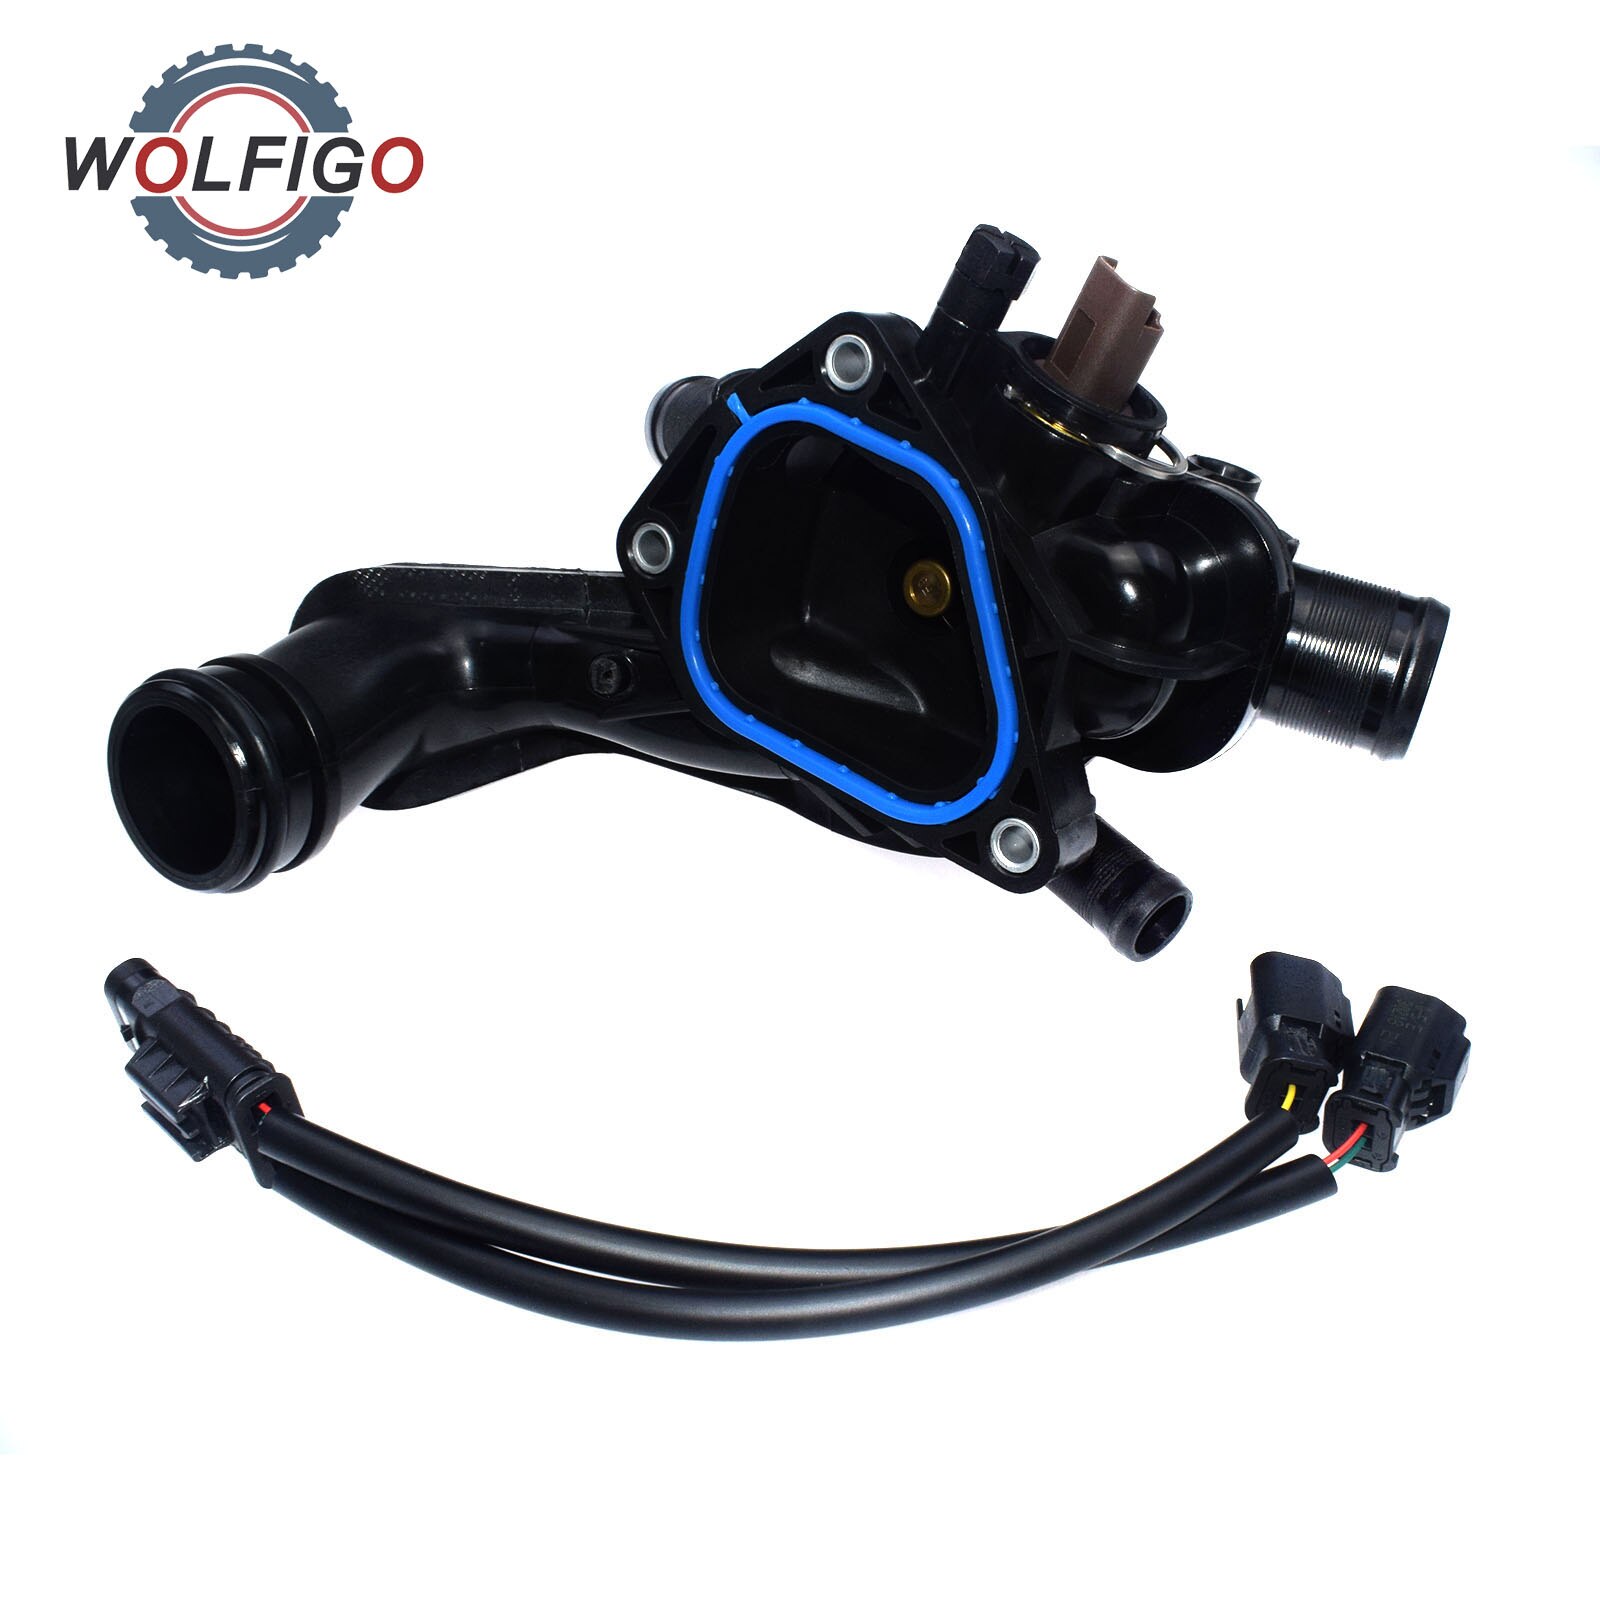 Wolfigo Thermostaat Behuizing Adapter Lead Kabel Voor Mini Cooper Clubman Jcw Roadster S Countryman R55/R56/R57/r58/R59 11537534521